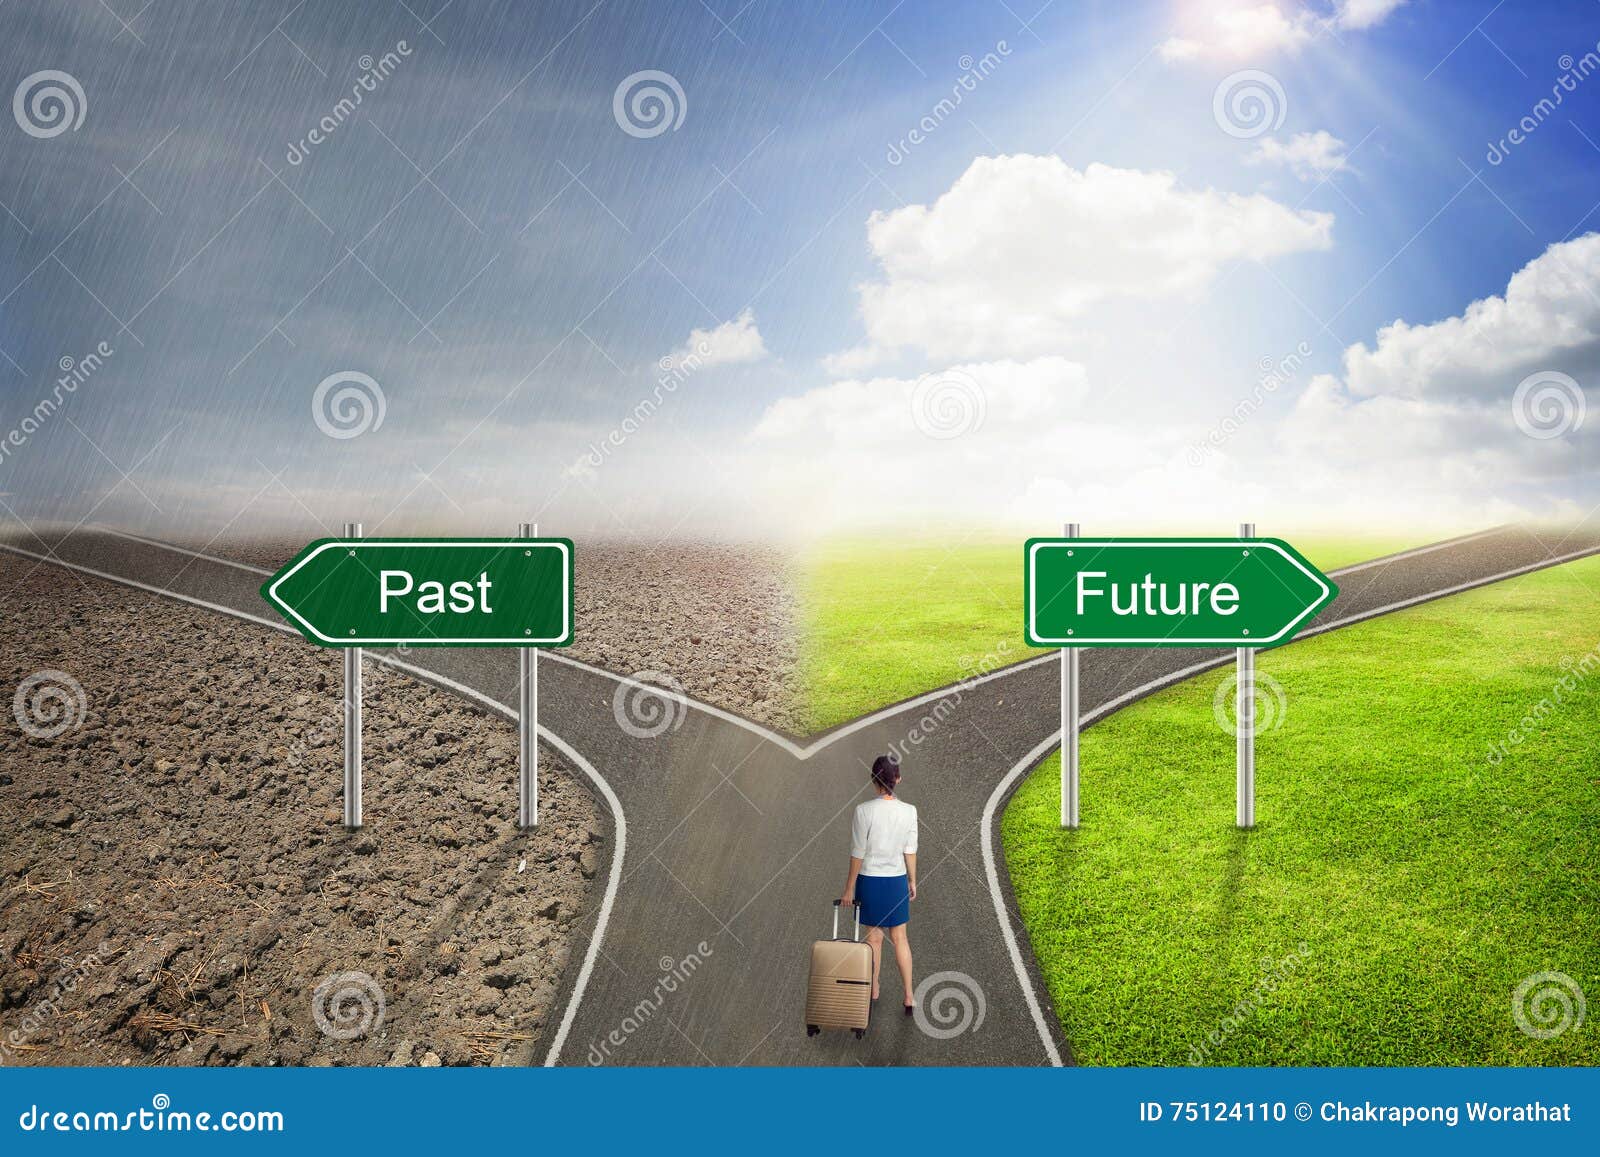 businessman concept, past or future road to the correct way.